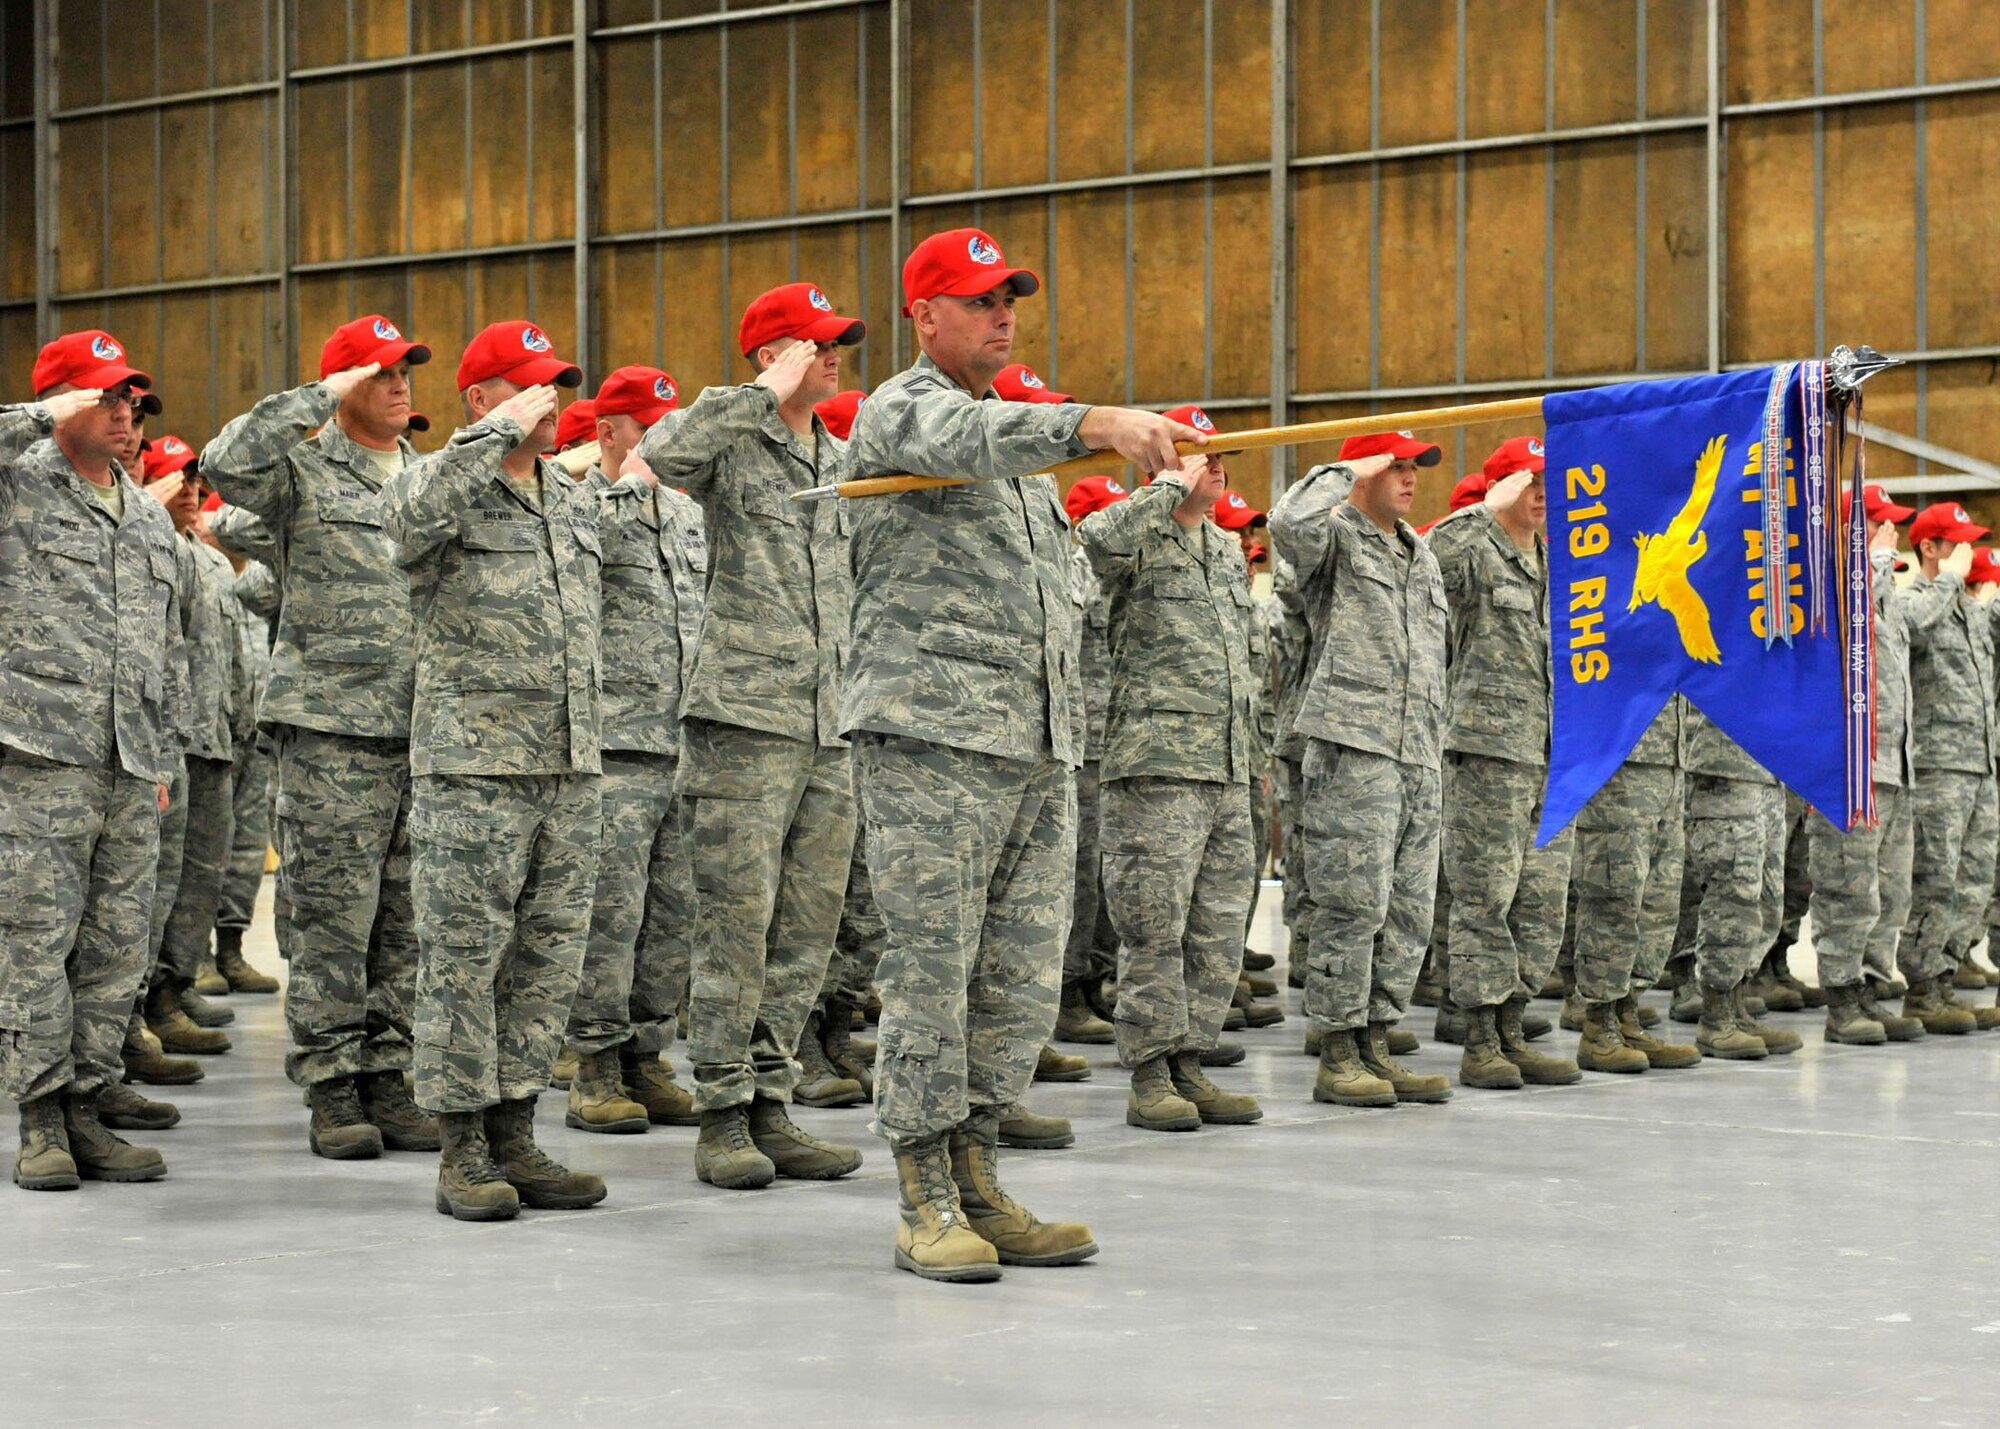 Members of the 219th RED HORSE Squadron salute during the posting of the colors during a change of command ceremony held at Malmstrom Air Force Base. (U.S. Air Force photo/Staff Sgt. John Turner)